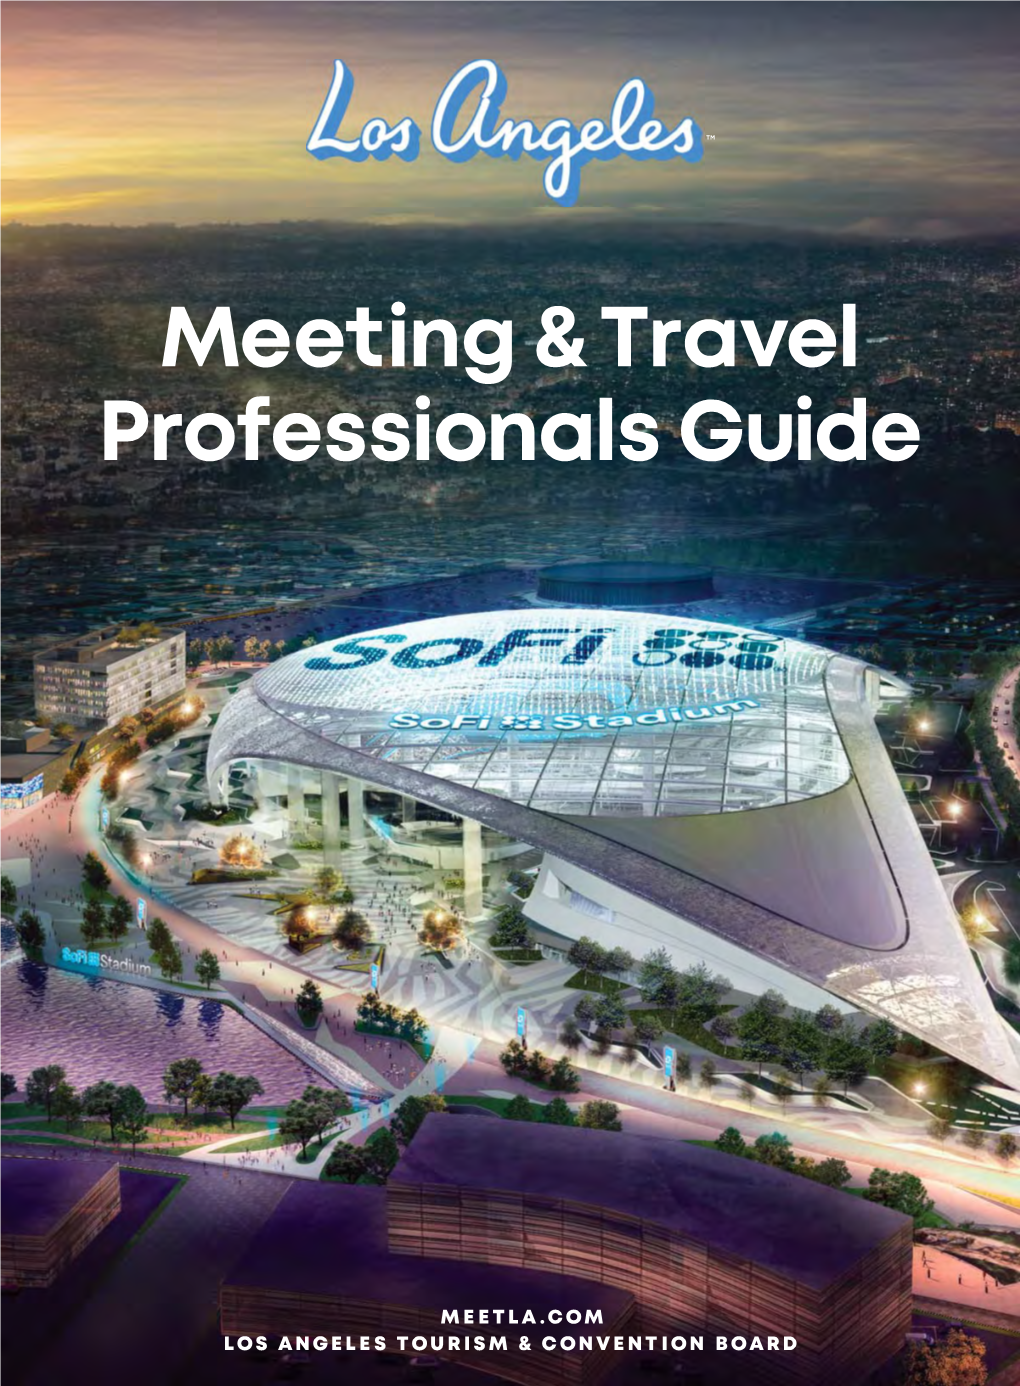 Meeting & Travel Professionals Guide